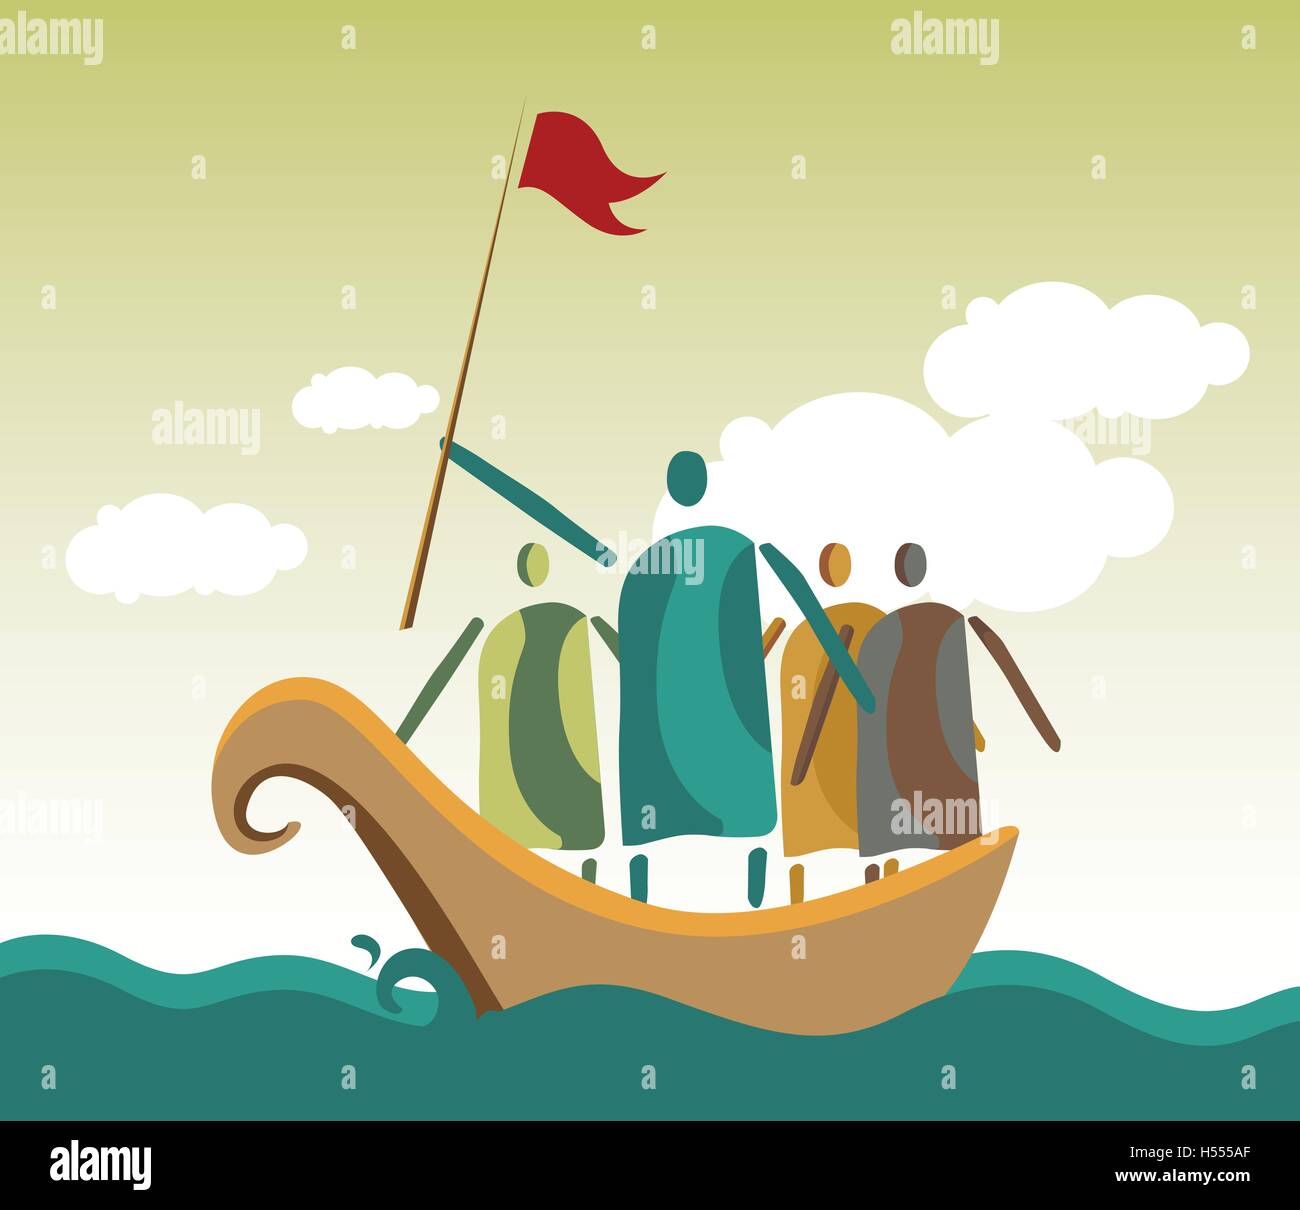 Leaders and people crowd the ocean. EPS 10 supported. Stock Vector